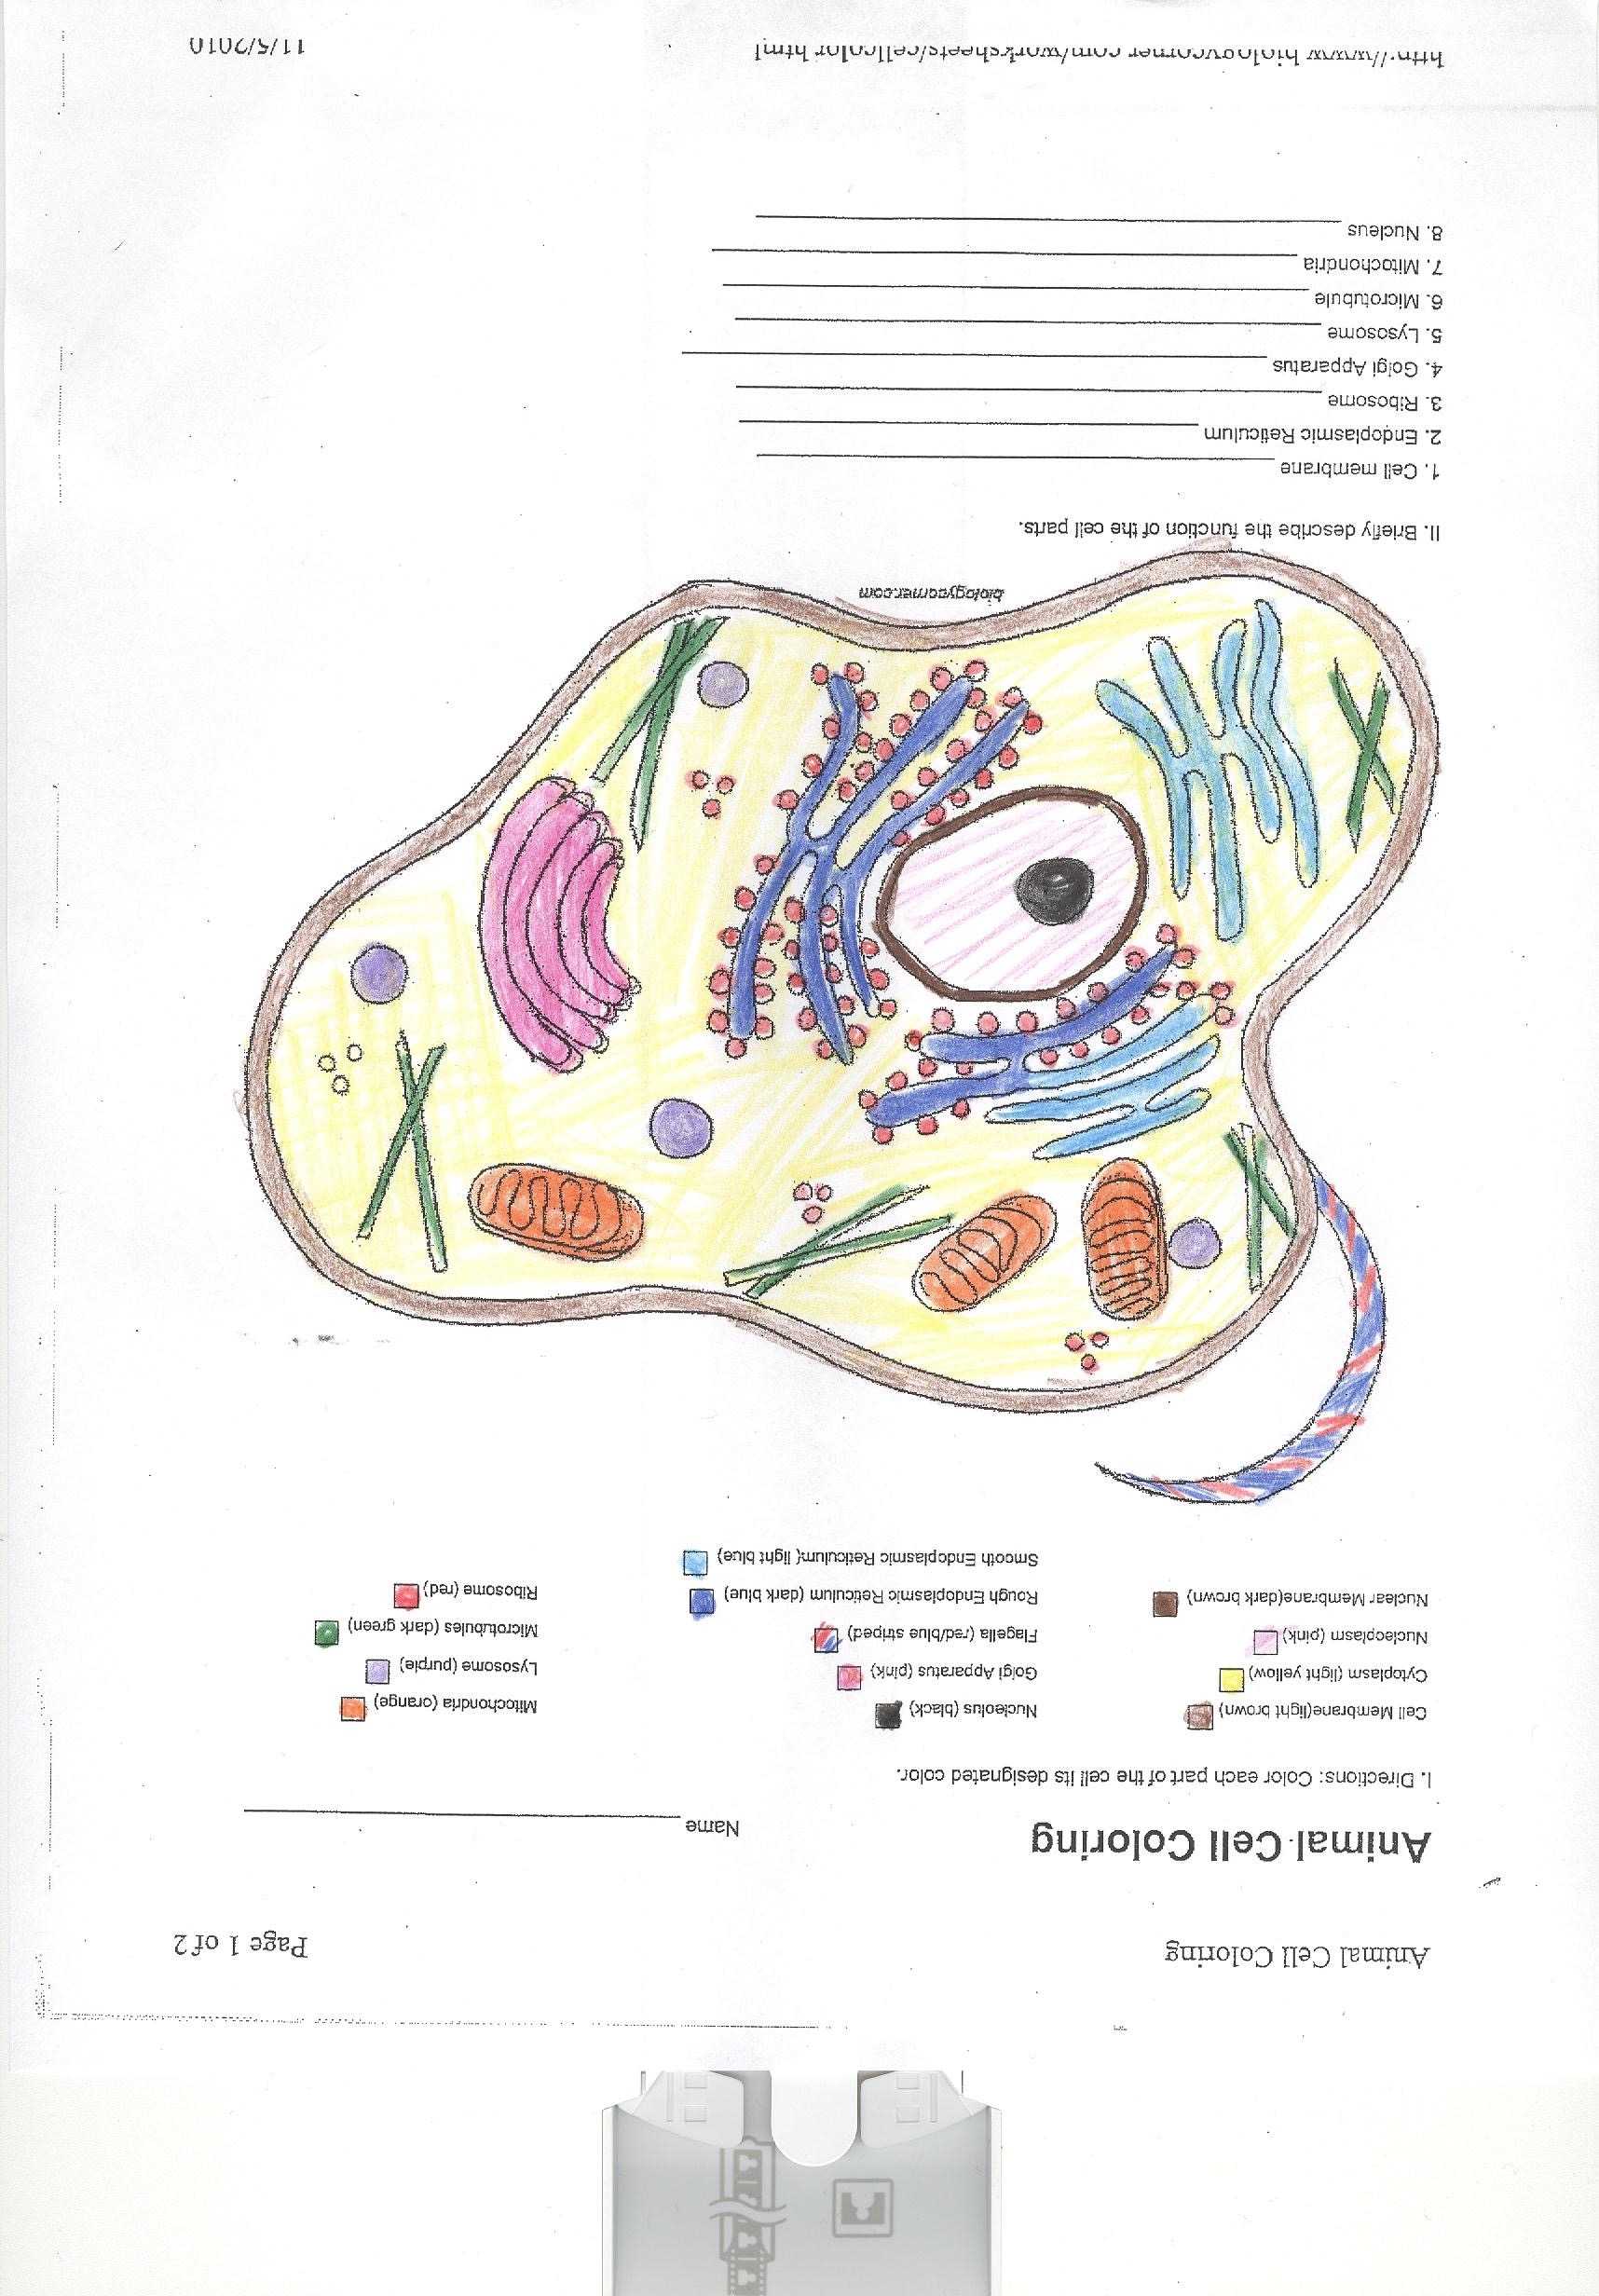 Plant Cell Worksheet Answers as Well as Animal Cell Coloring Worksheet Answer Key Color Of Love 4a480b96e0a3